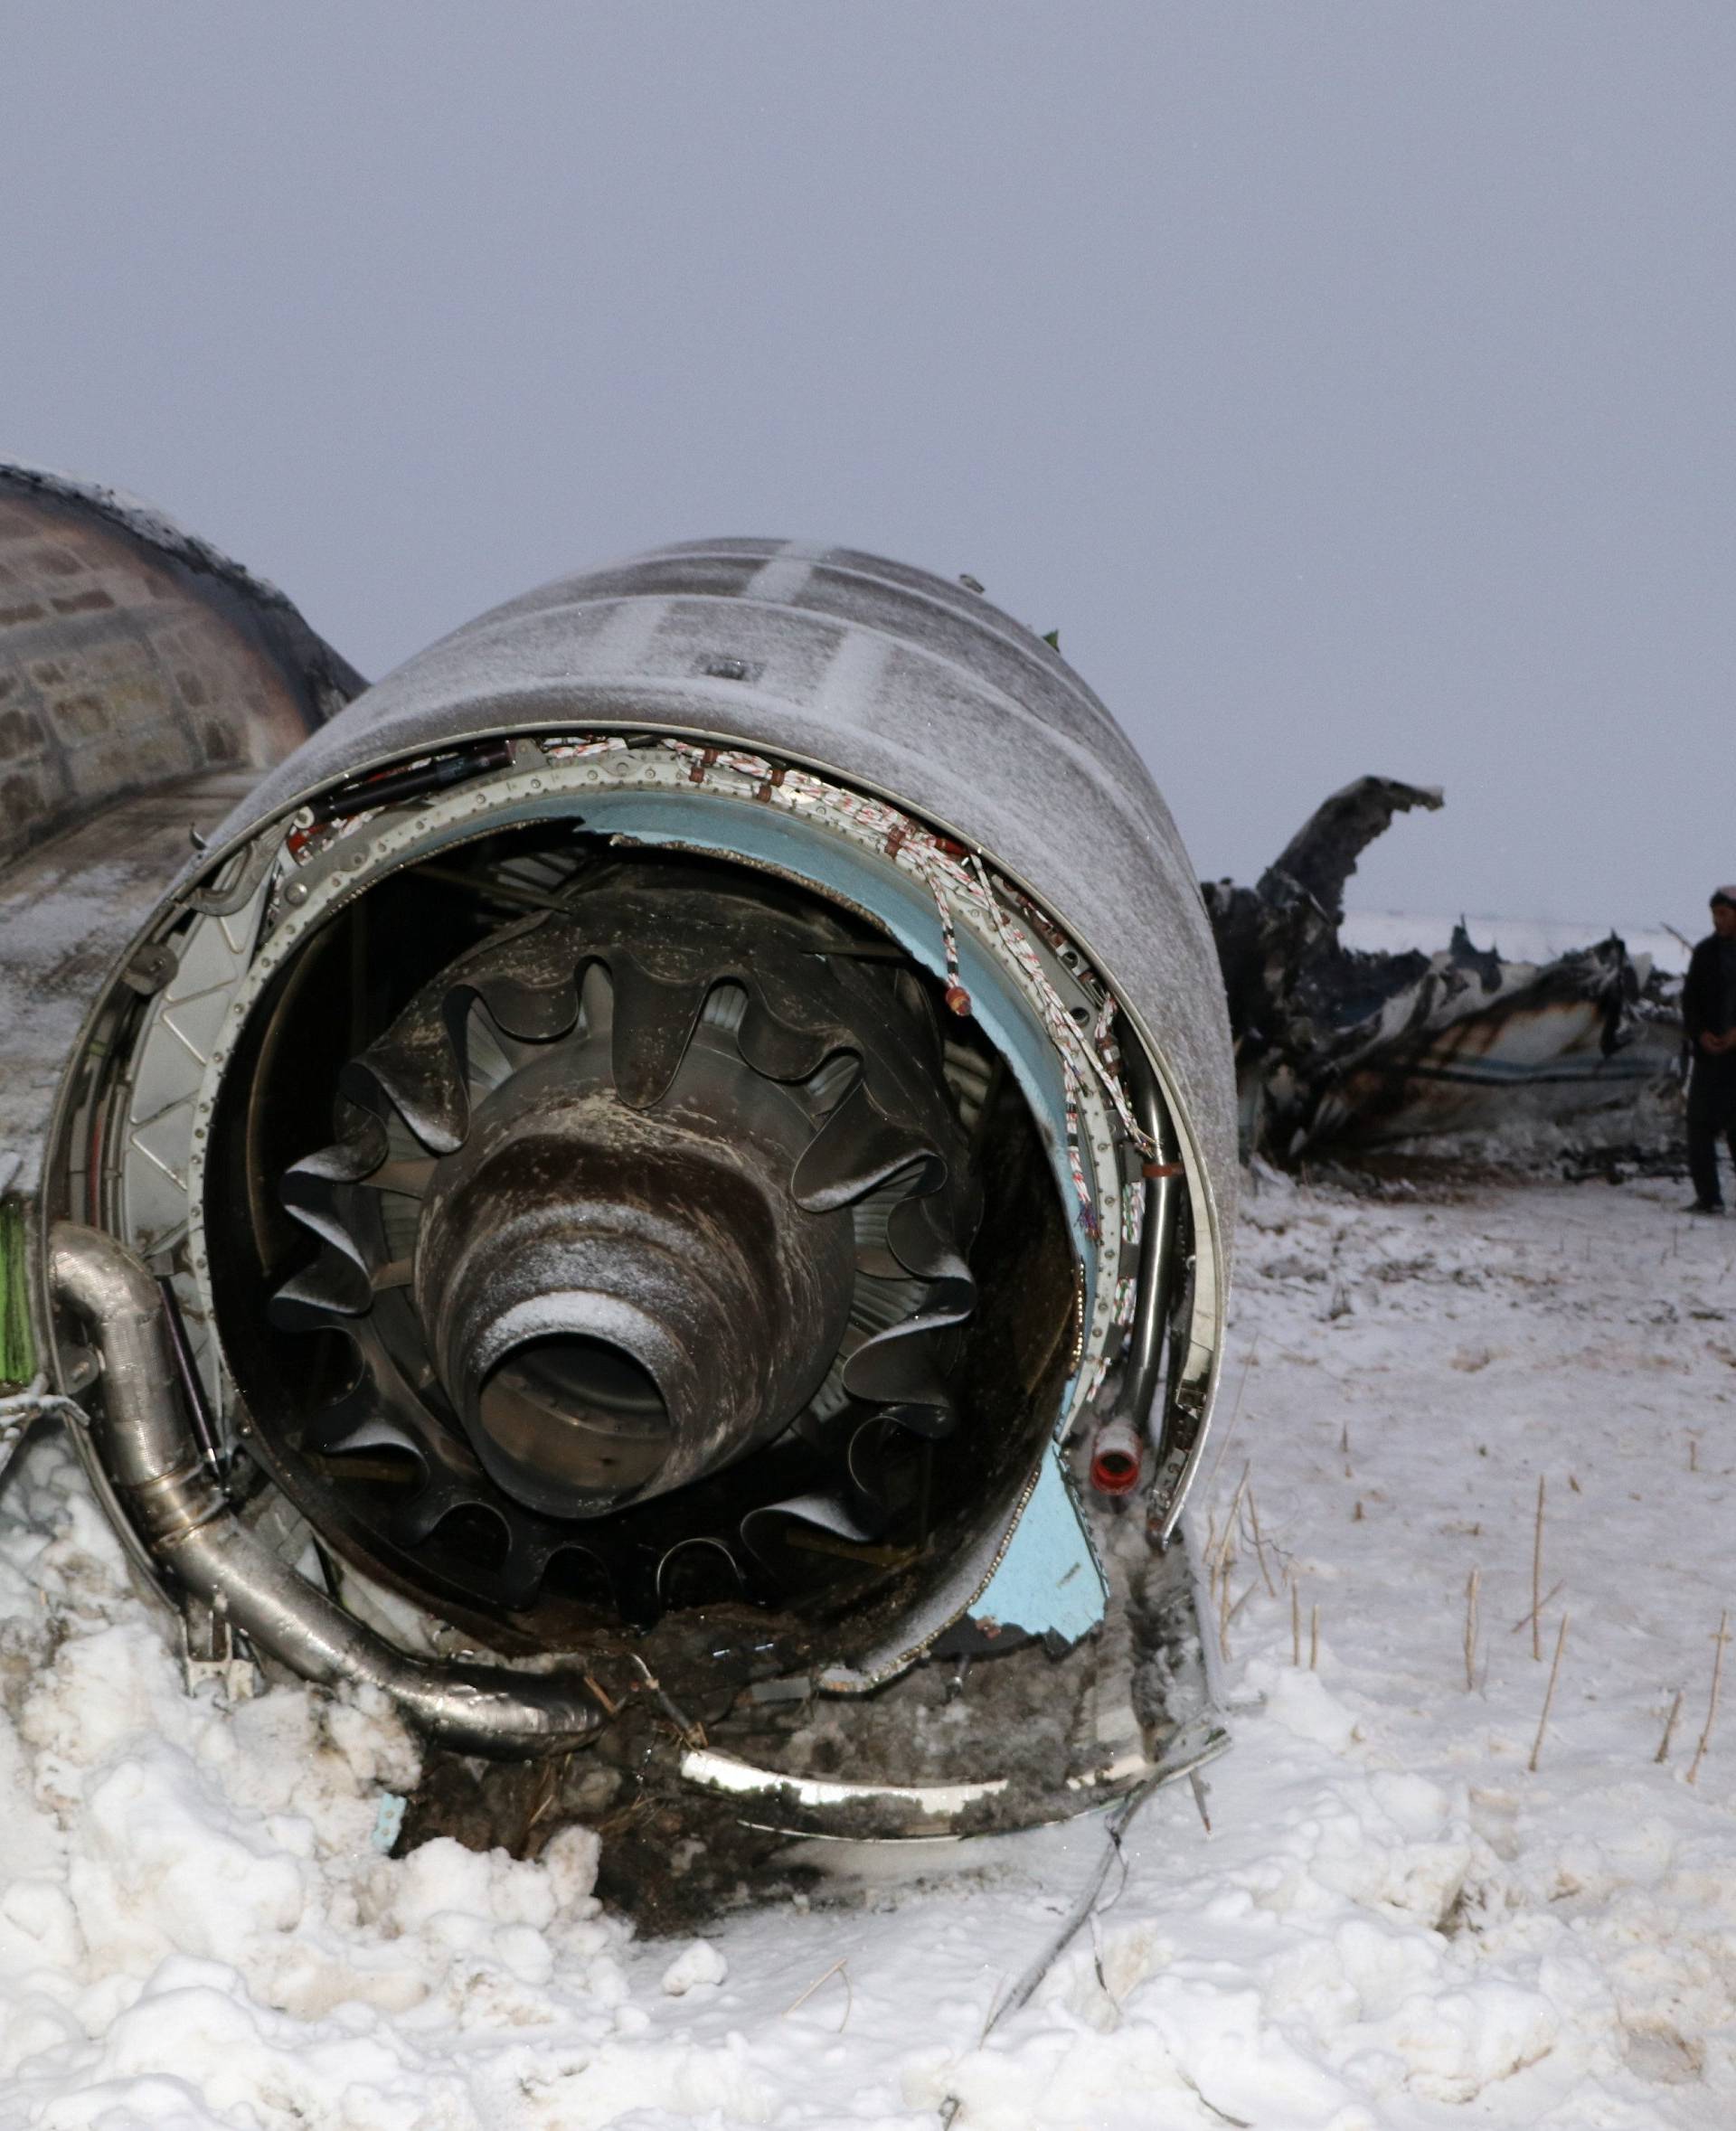 The wreckage of an airplane is seen after a crash in Deh Yak district of Ghazni province, Afghanistan